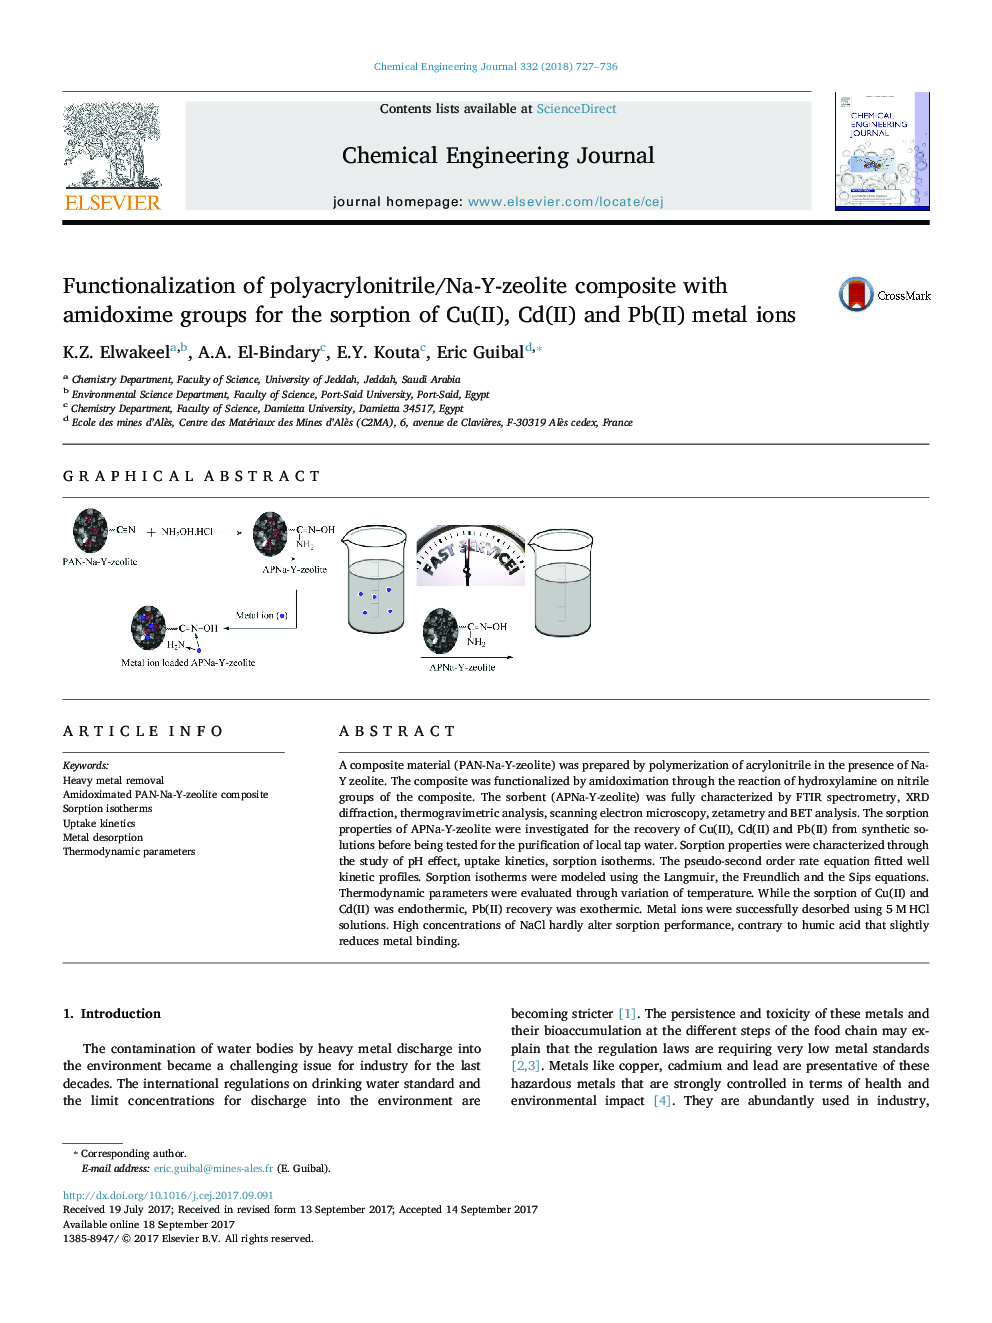 Functionalization of polyacrylonitrile/Na-Y-zeolite composite with amidoxime groups for the sorption of Cu(II), Cd(II) and Pb(II) metal ions